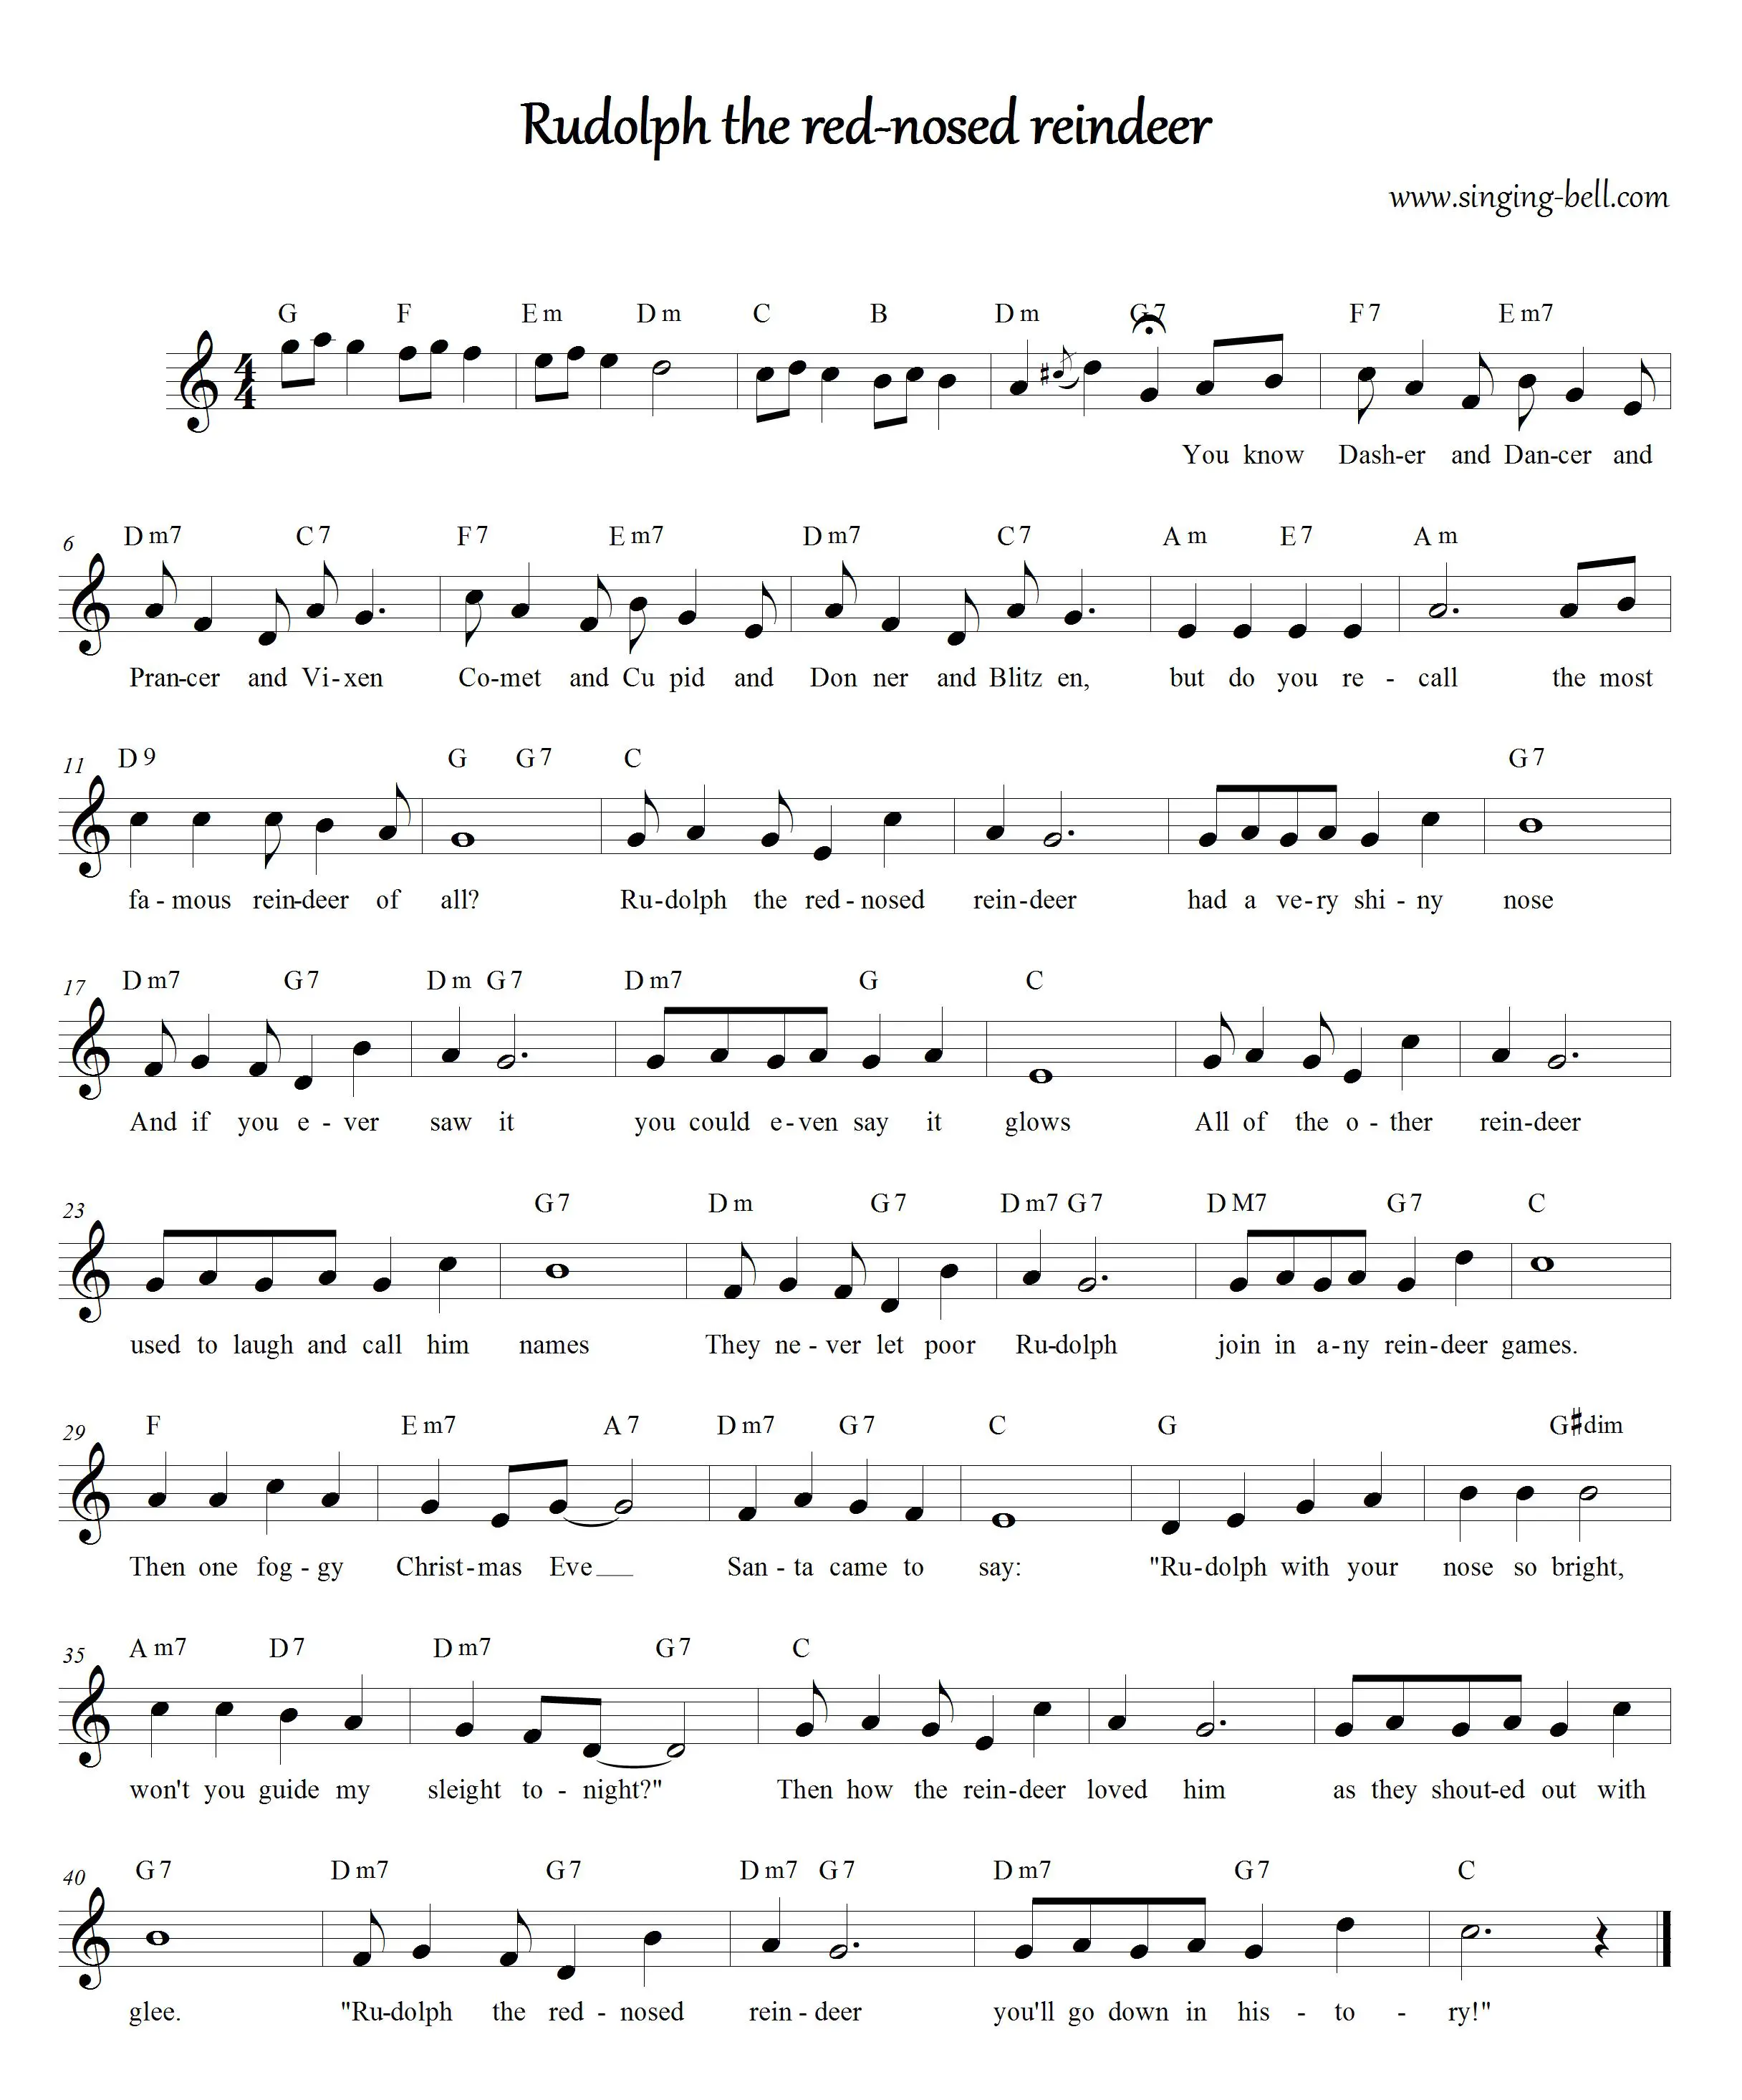 Rudolph, the red-nosed reindeer - Free Christmas music score download